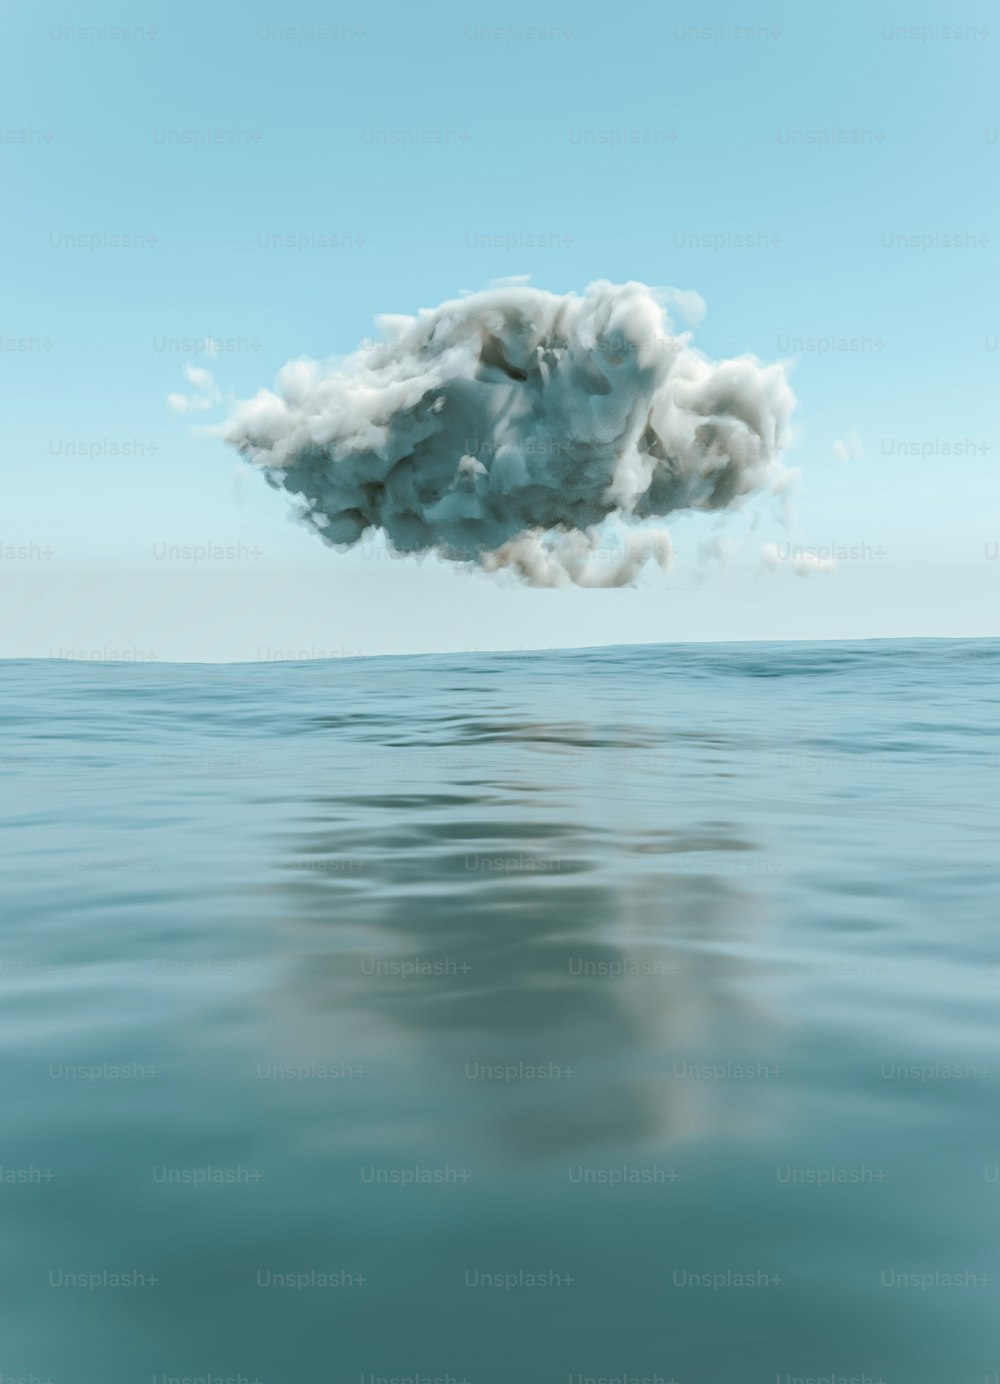 a cloud floating in the air over a body of water